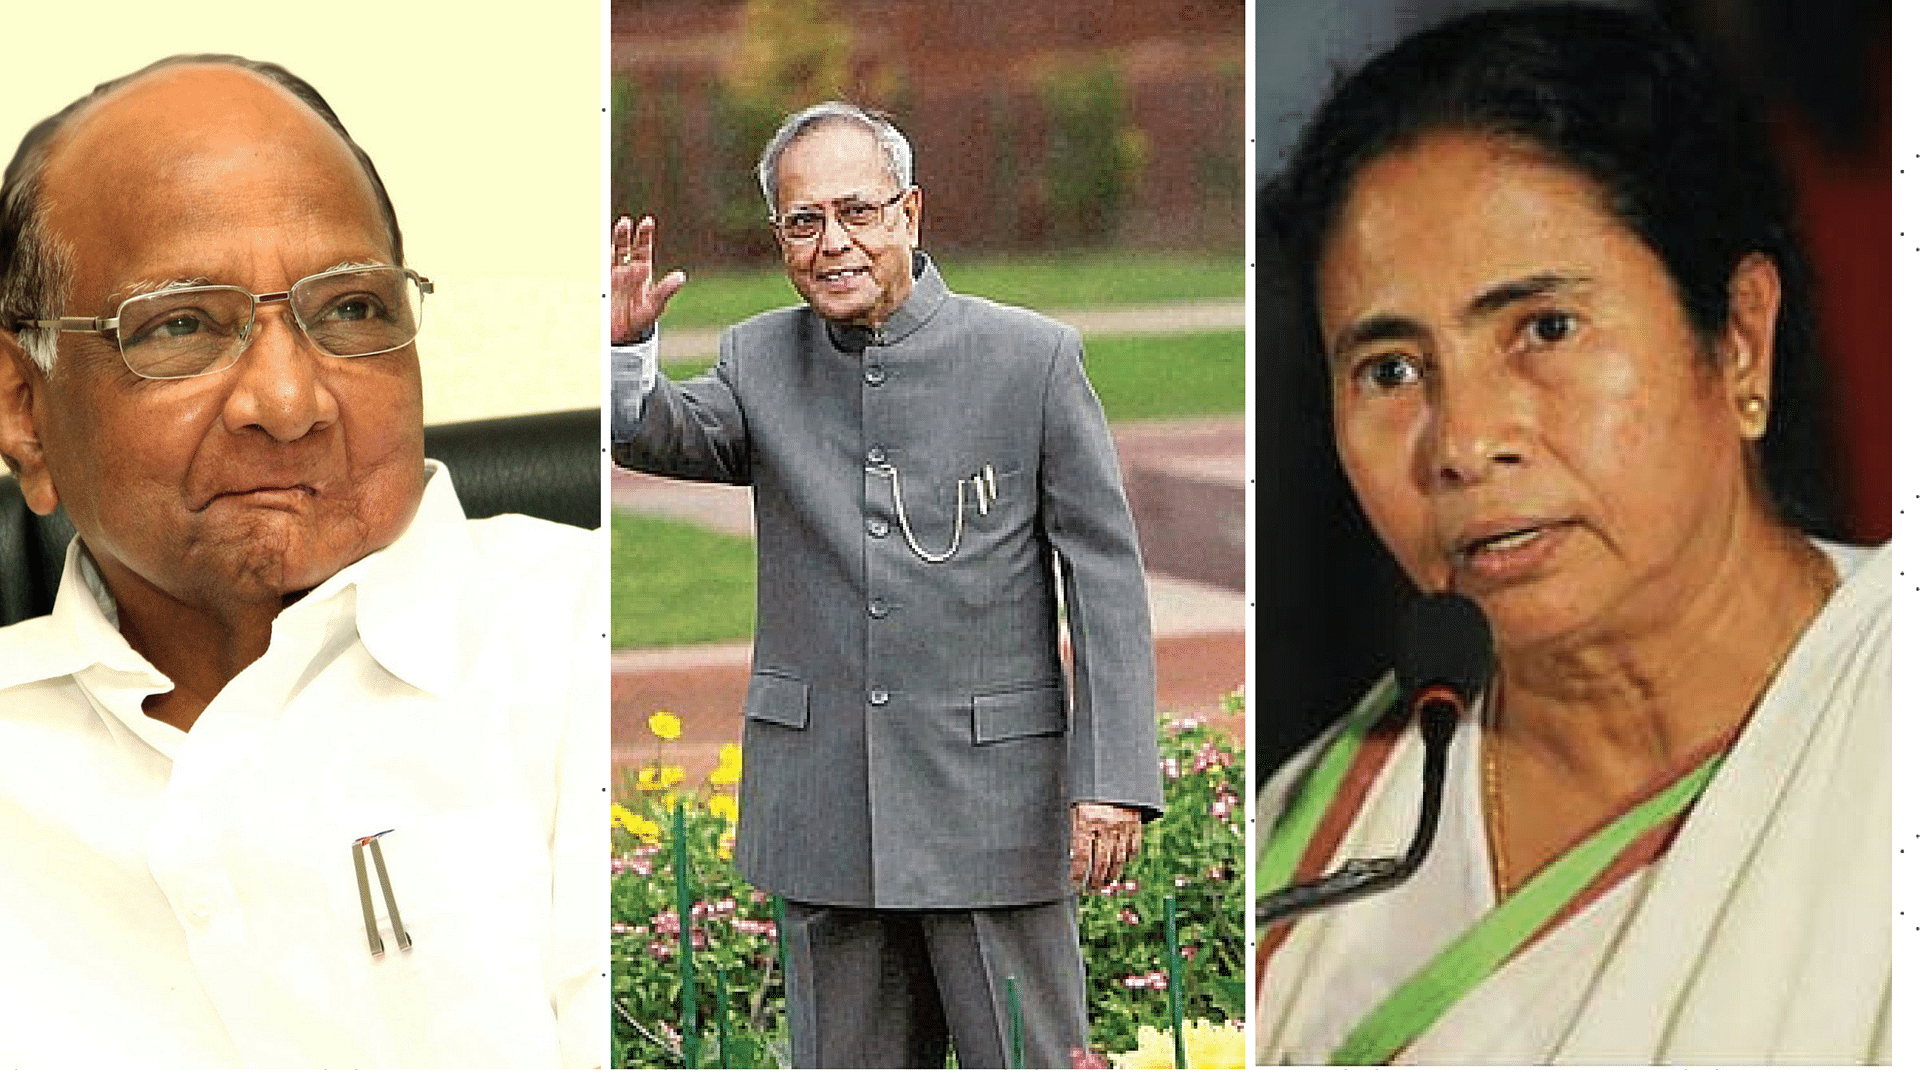 NCP chief Sharad Yadav, President Pranab Mukherjee and West Bengal CM Mamata Banerjee left Congress at one point or the other. (Photo: <b>The Quint</b>)